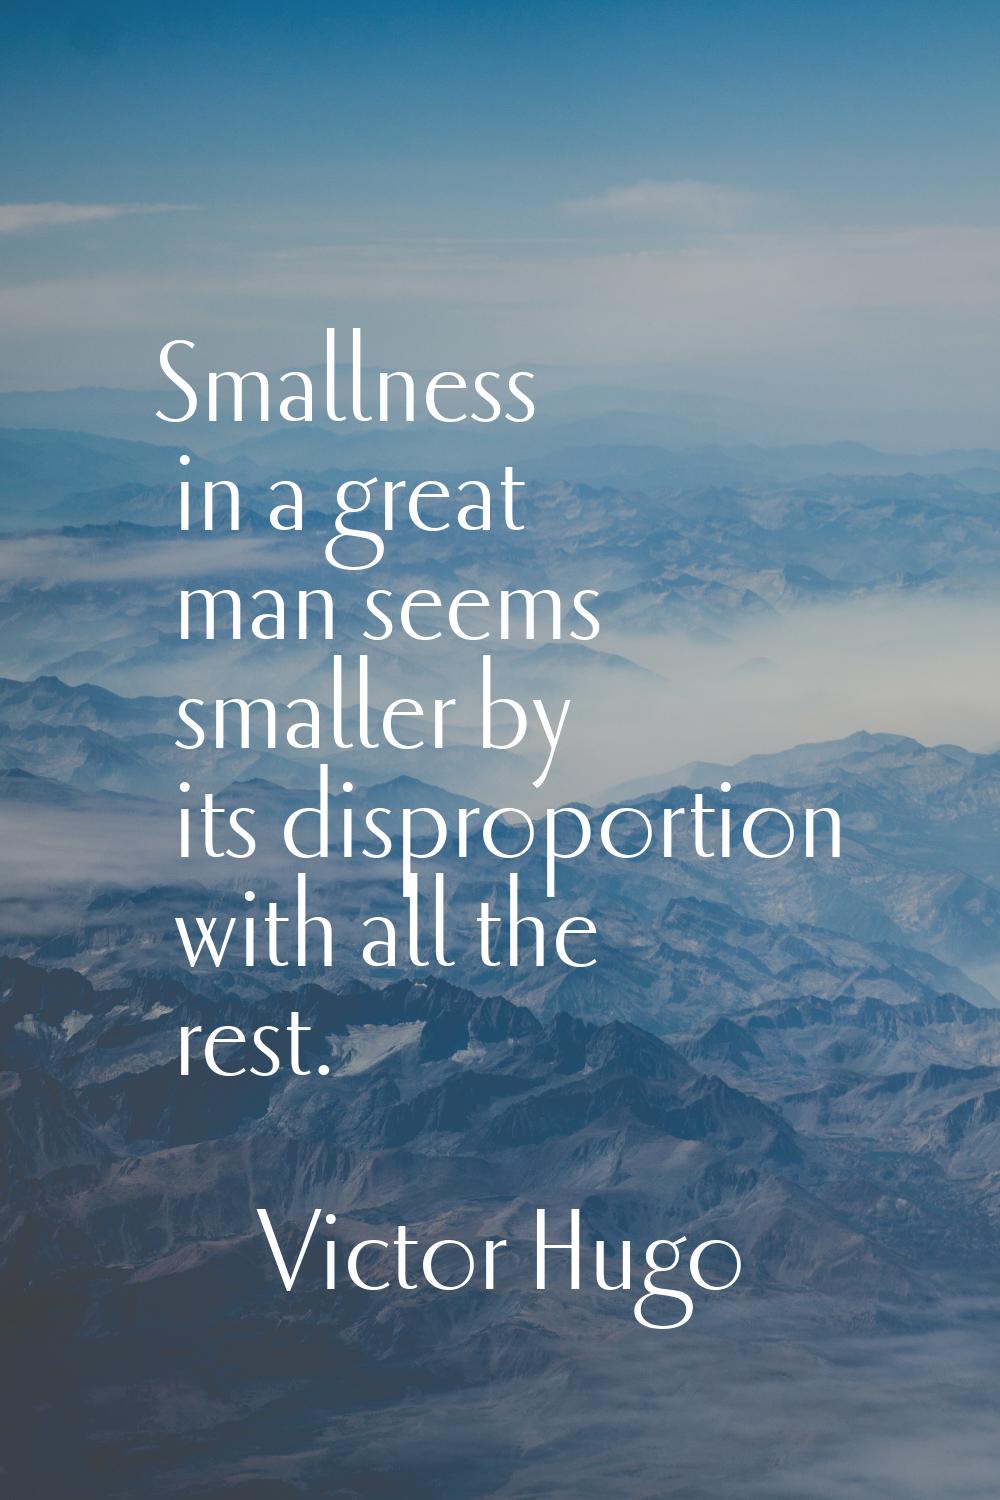 Smallness in a great man seems smaller by its disproportion with all the rest.